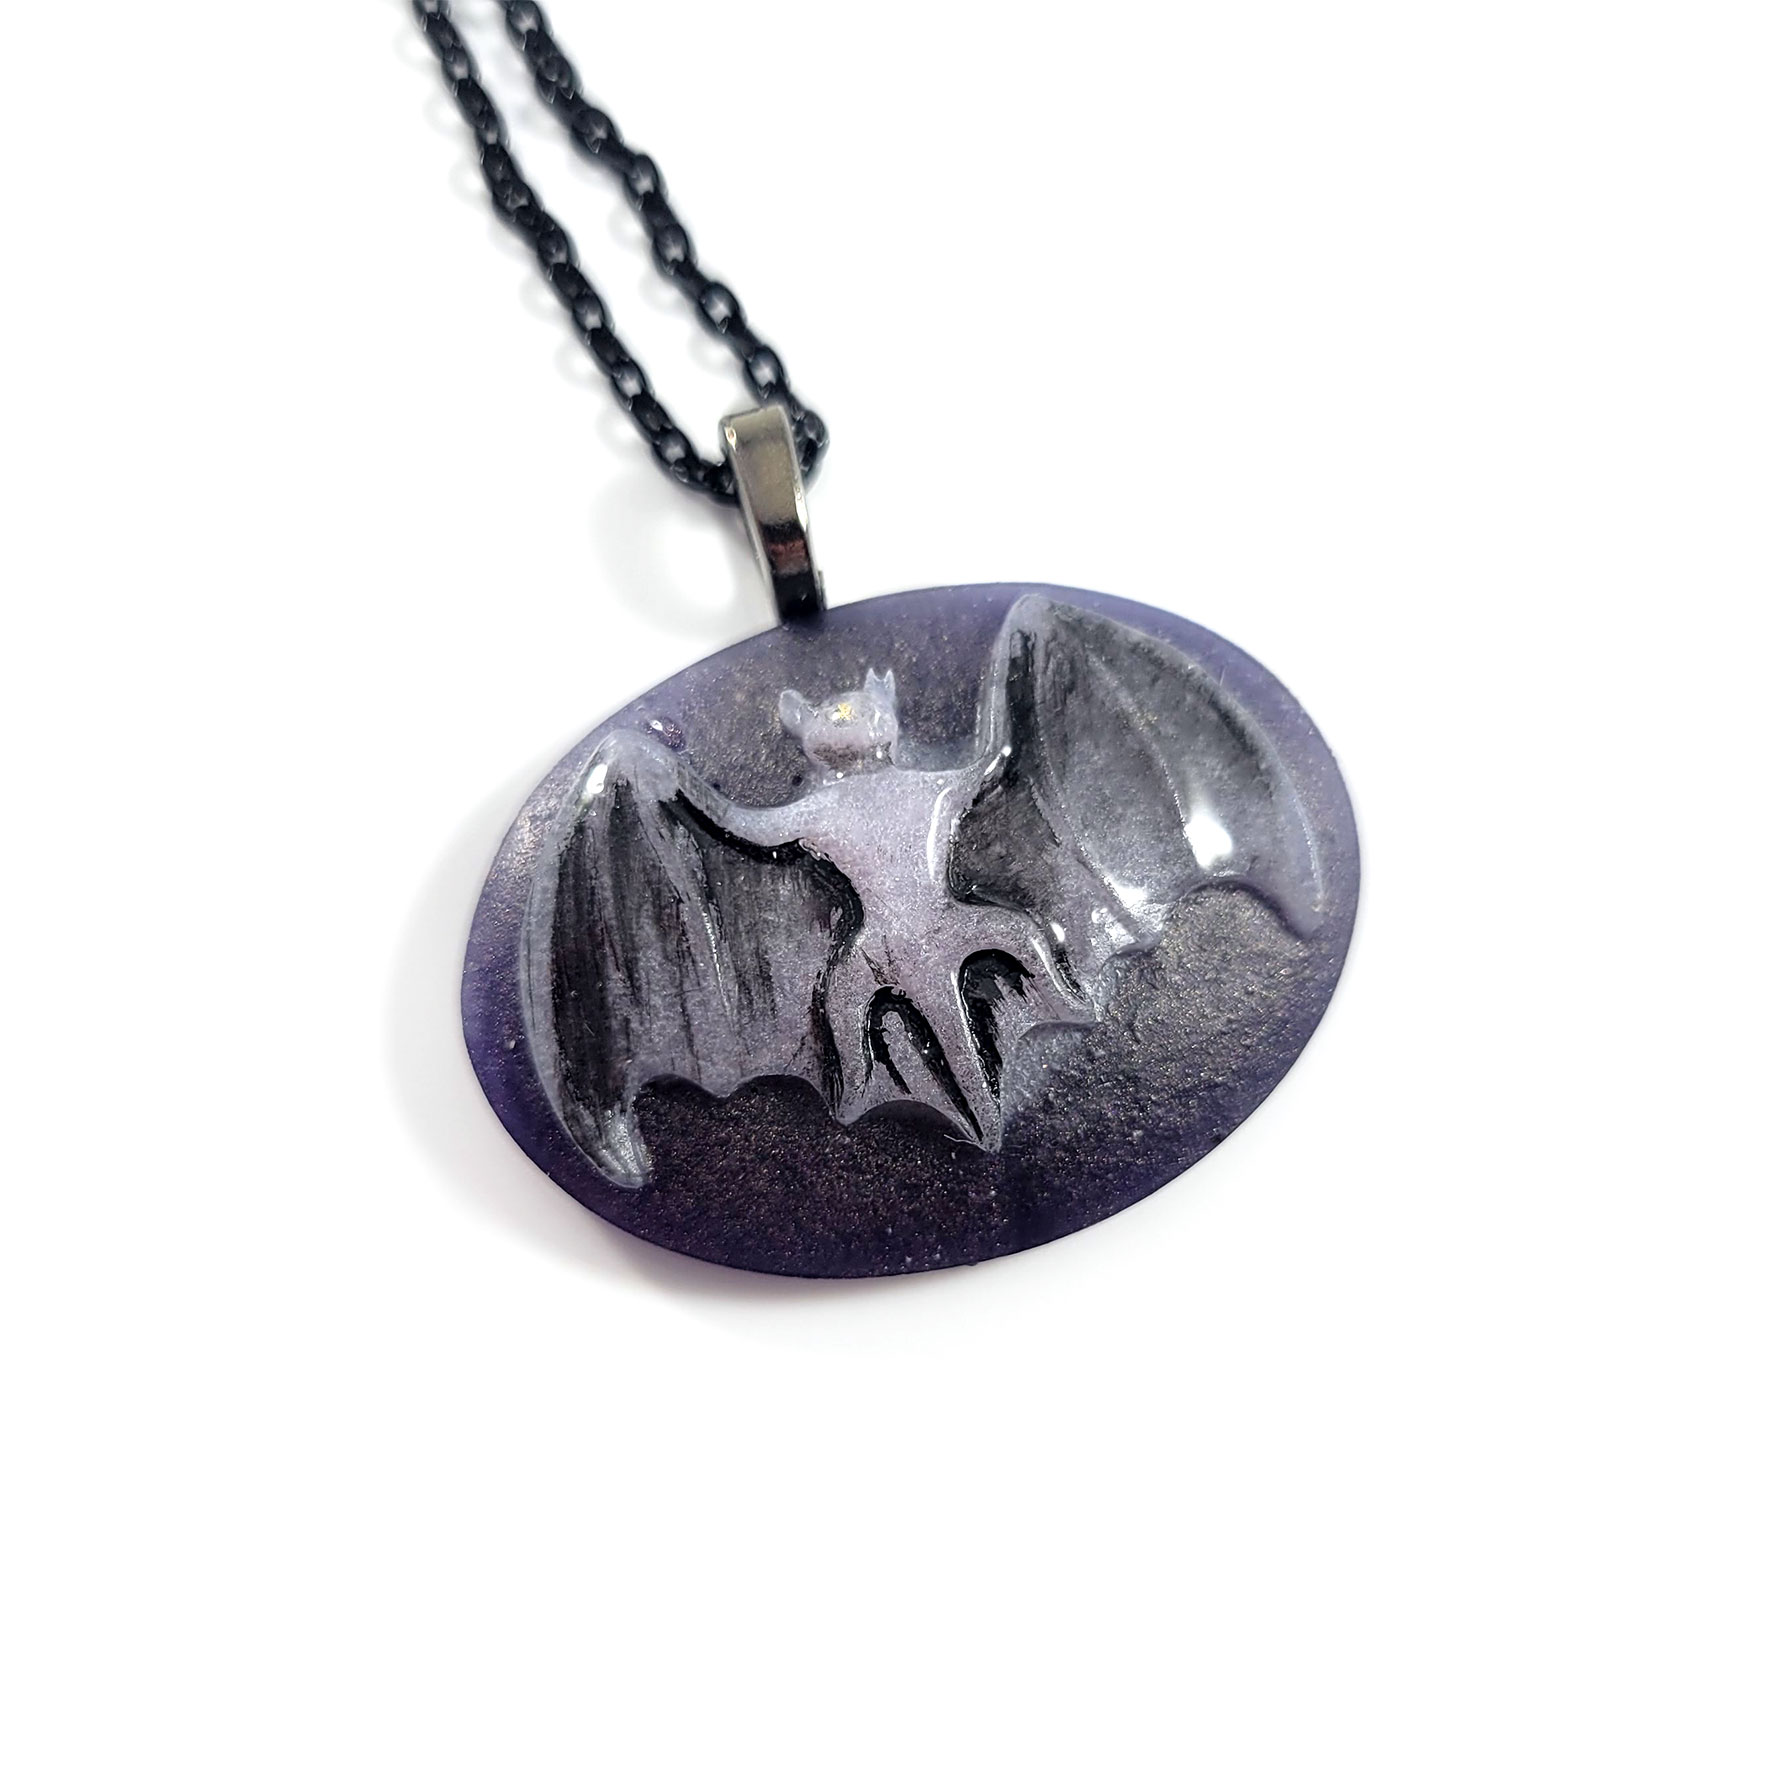 Classy Bat Cameo Necklace by Wilde Designs